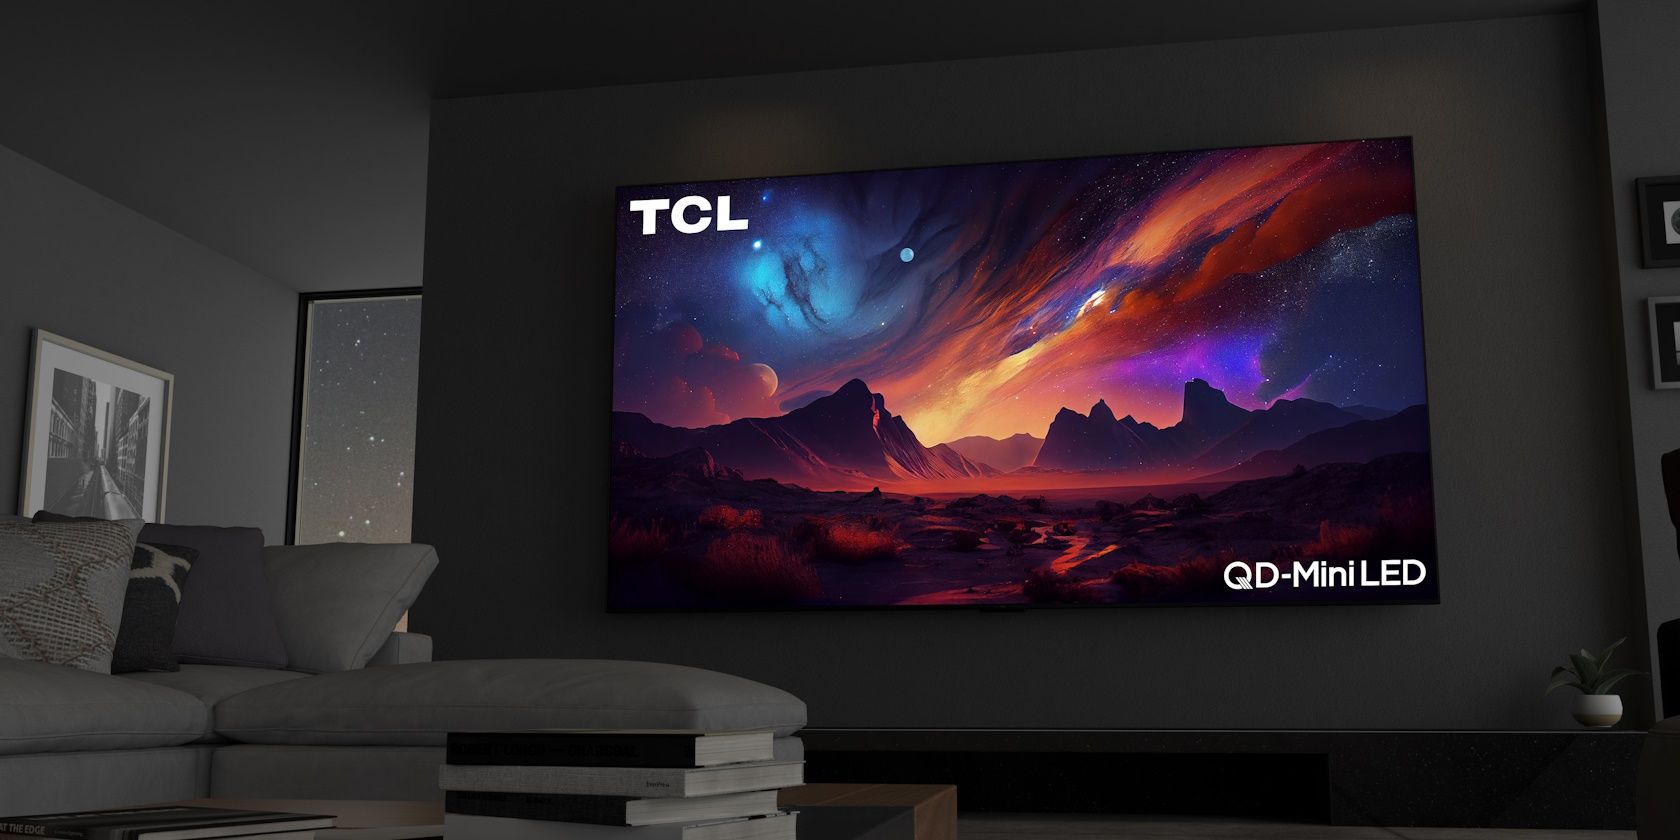 tcl qd-mini led tv on a wall with dark background